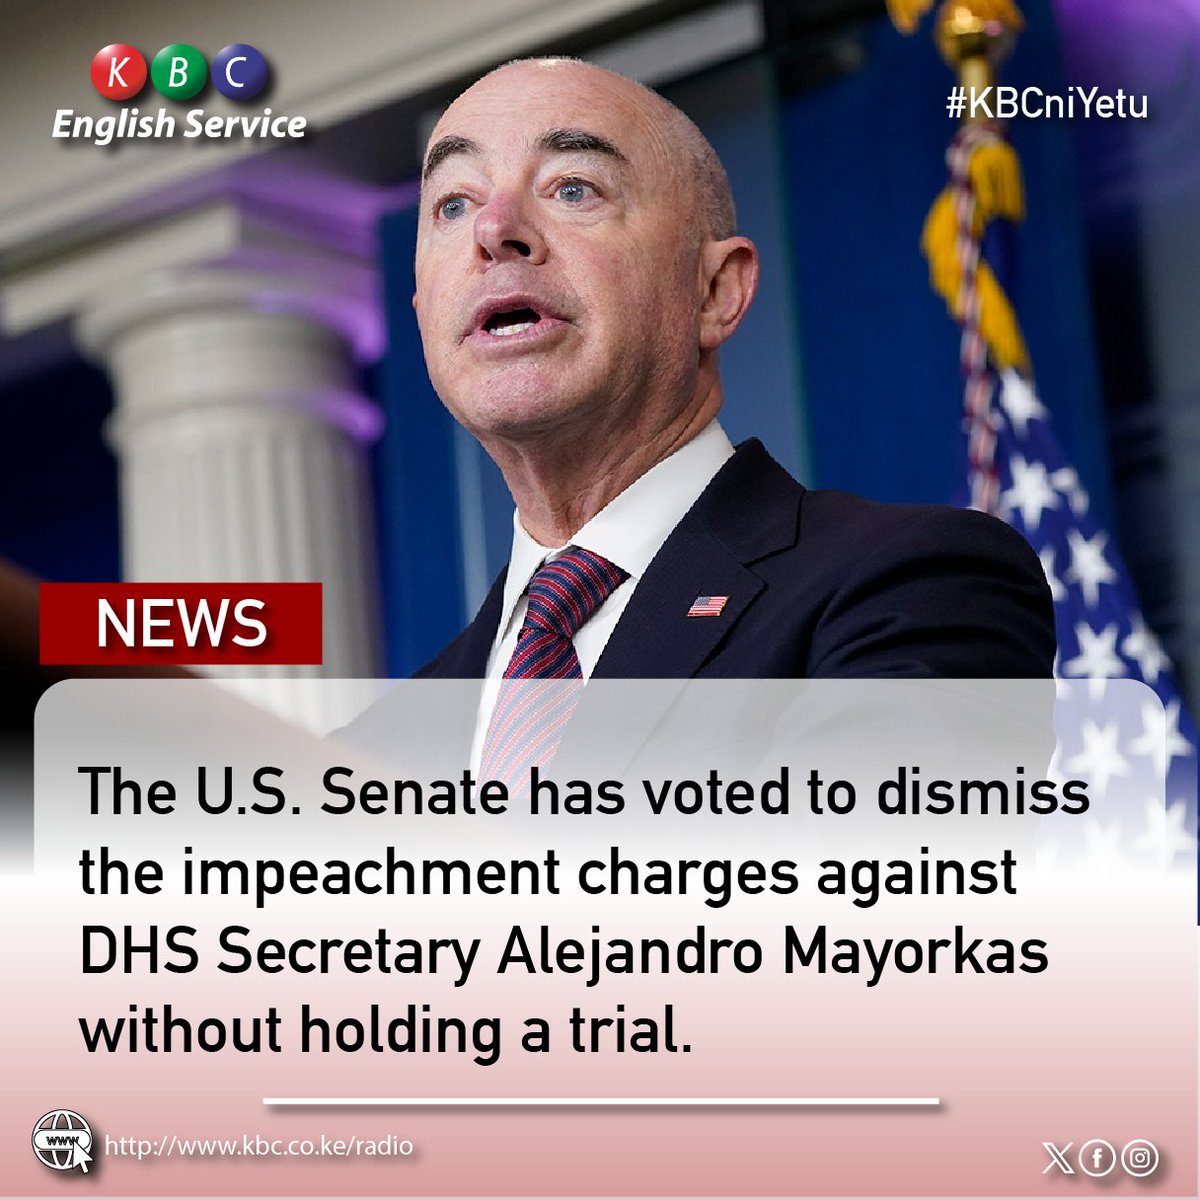 The U.S. Senate has voted to dismiss the impeachment charges against DHS Secretary Alejandro Mayorkas without holding a trial. ^PMN #KBCEnglishService